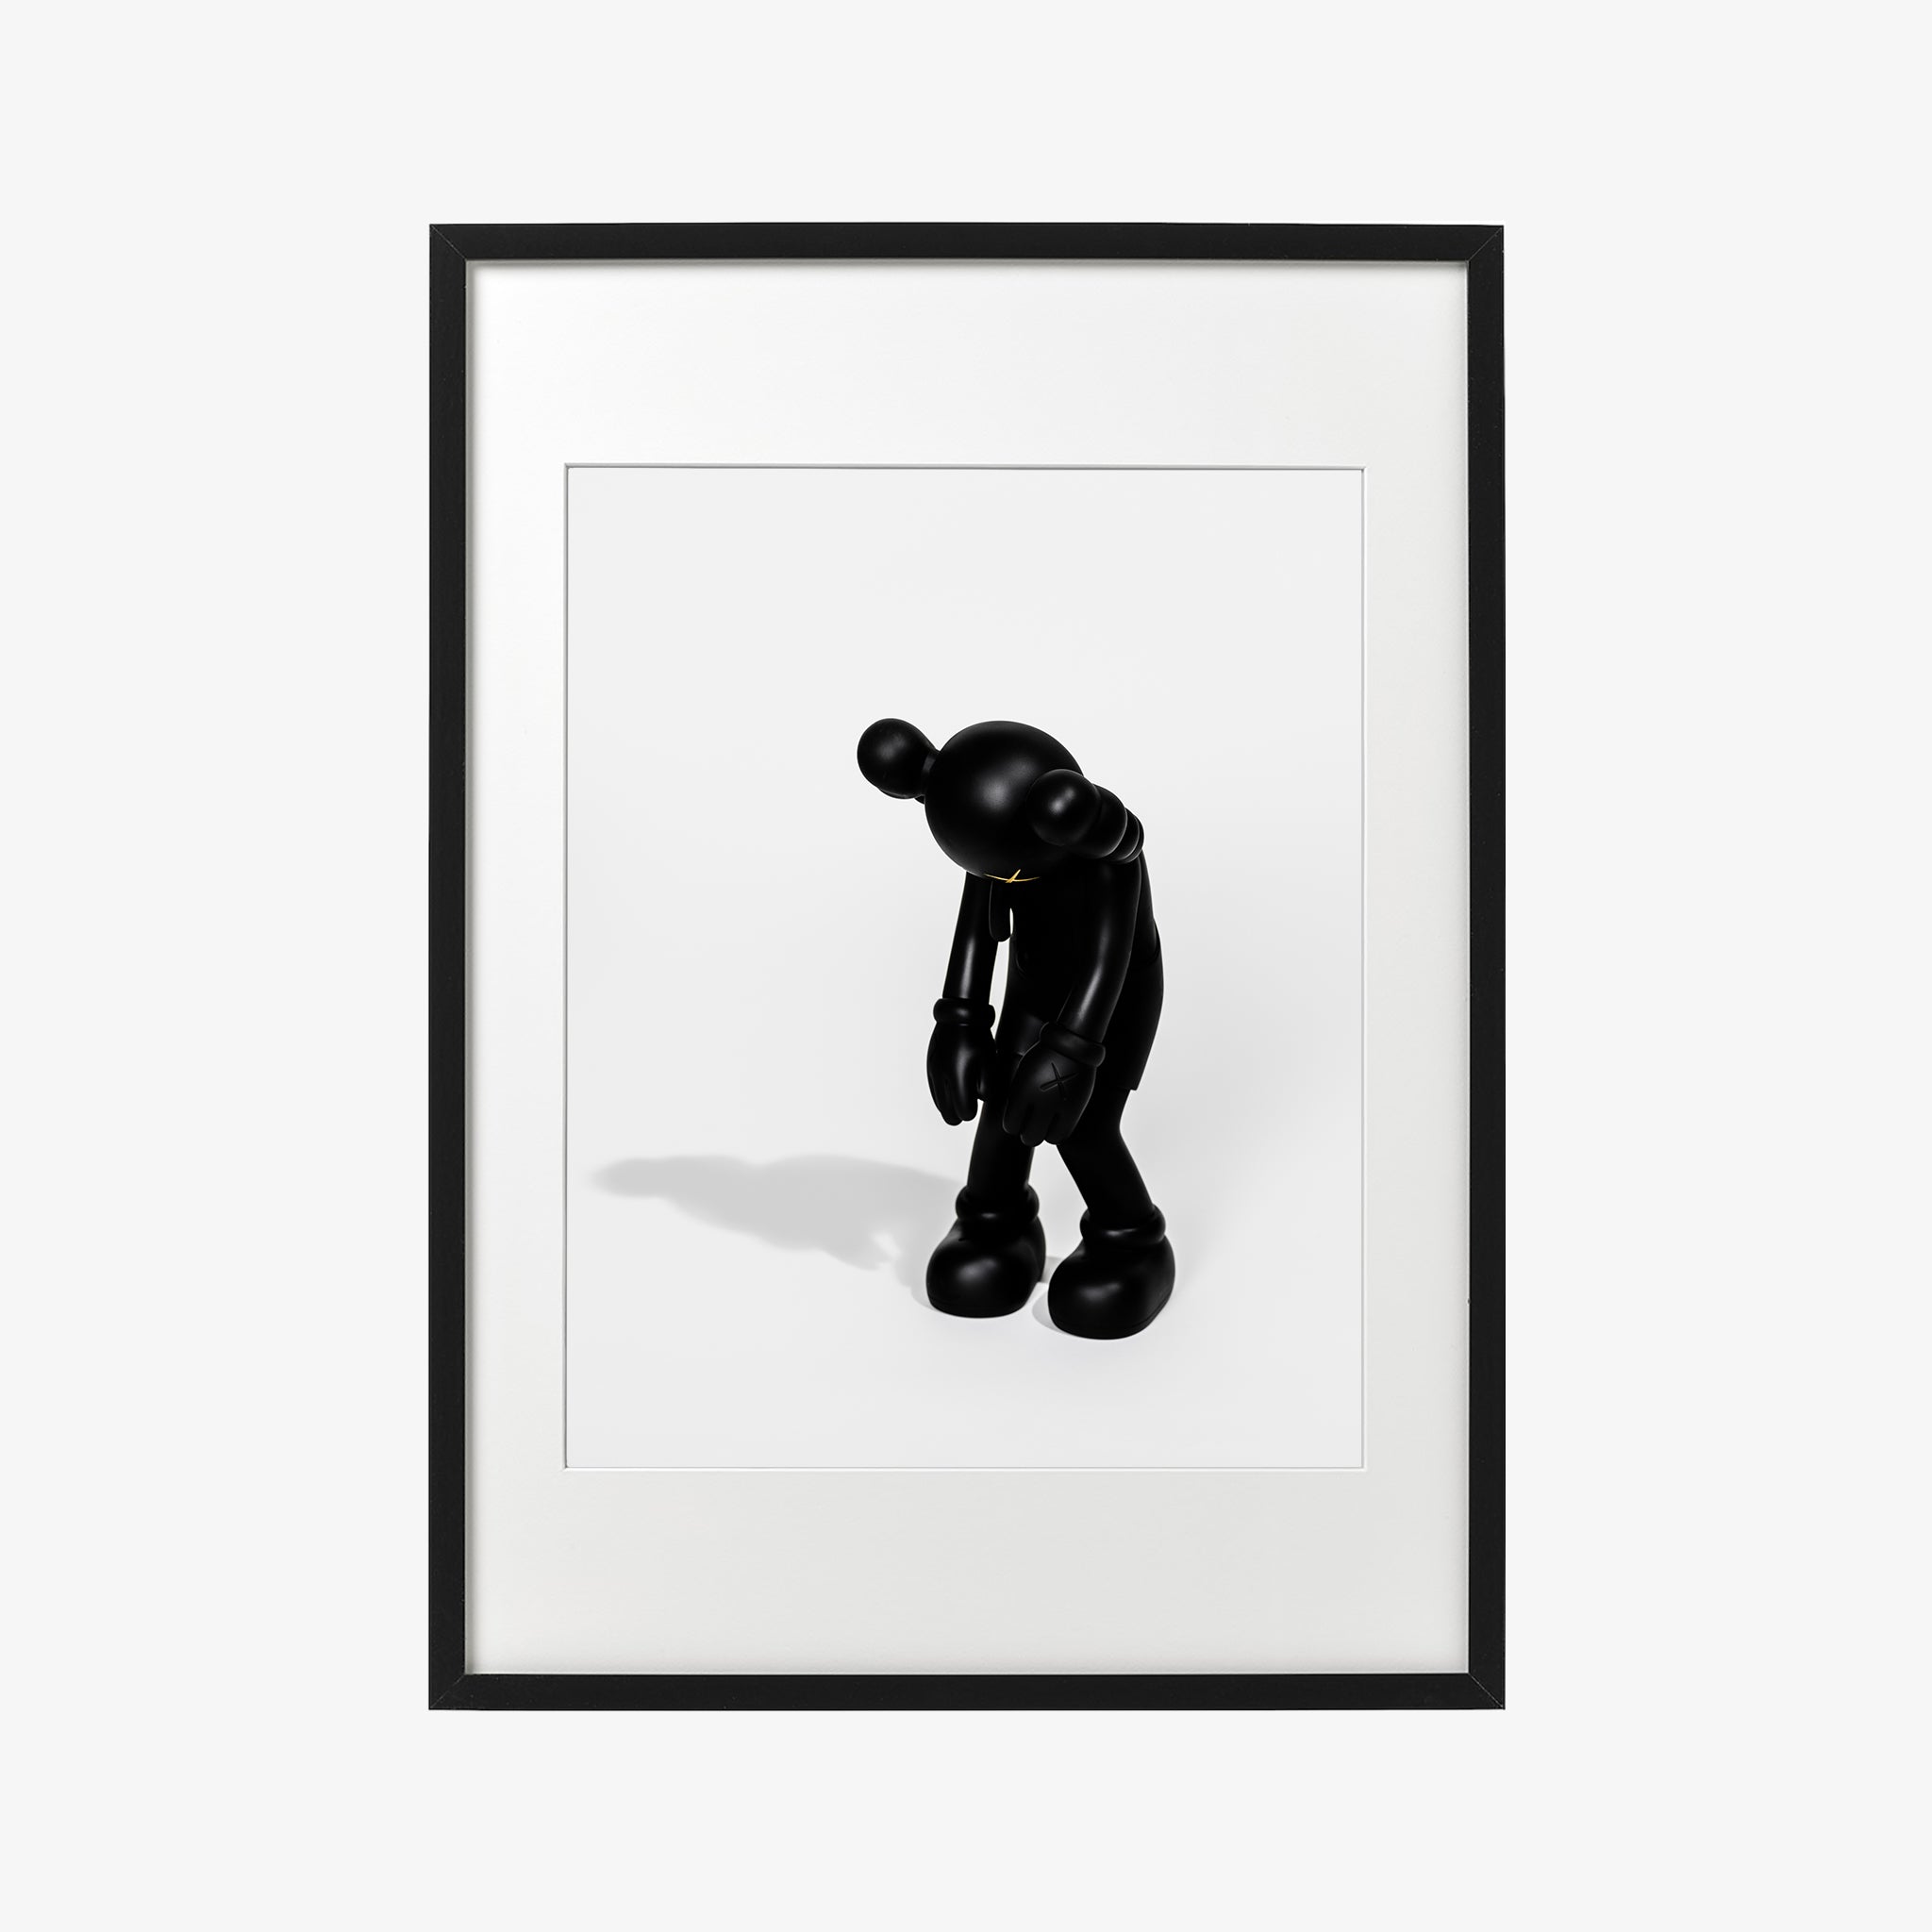 ARMOIRE'S "ART of ART" SERIES FEATURING PHOTOGRAPHS OF KAWS SMALL LIE FIGURES